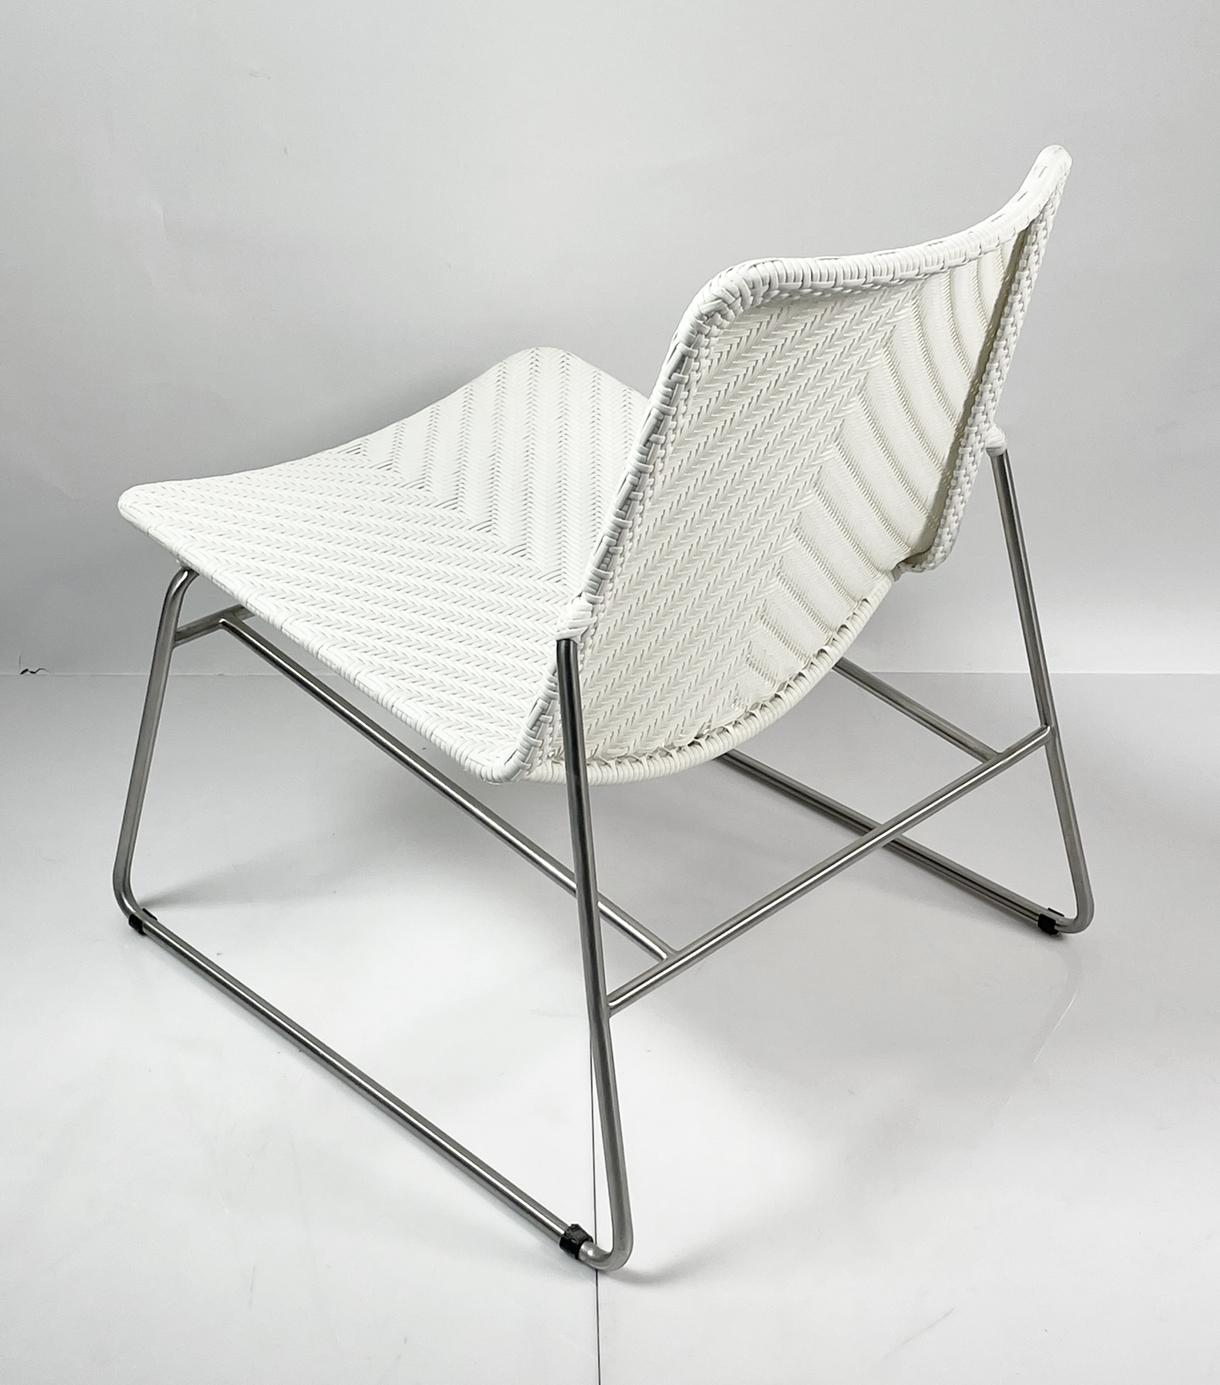 Beautiful chair with clean lines, chromed frame a faux wicker seat.
The chair is very comfortable and it can be used indoors or outdoors.

Measurements:
31 inches high x 22 inches wide x 29 inches deep x 17 inches seat height.